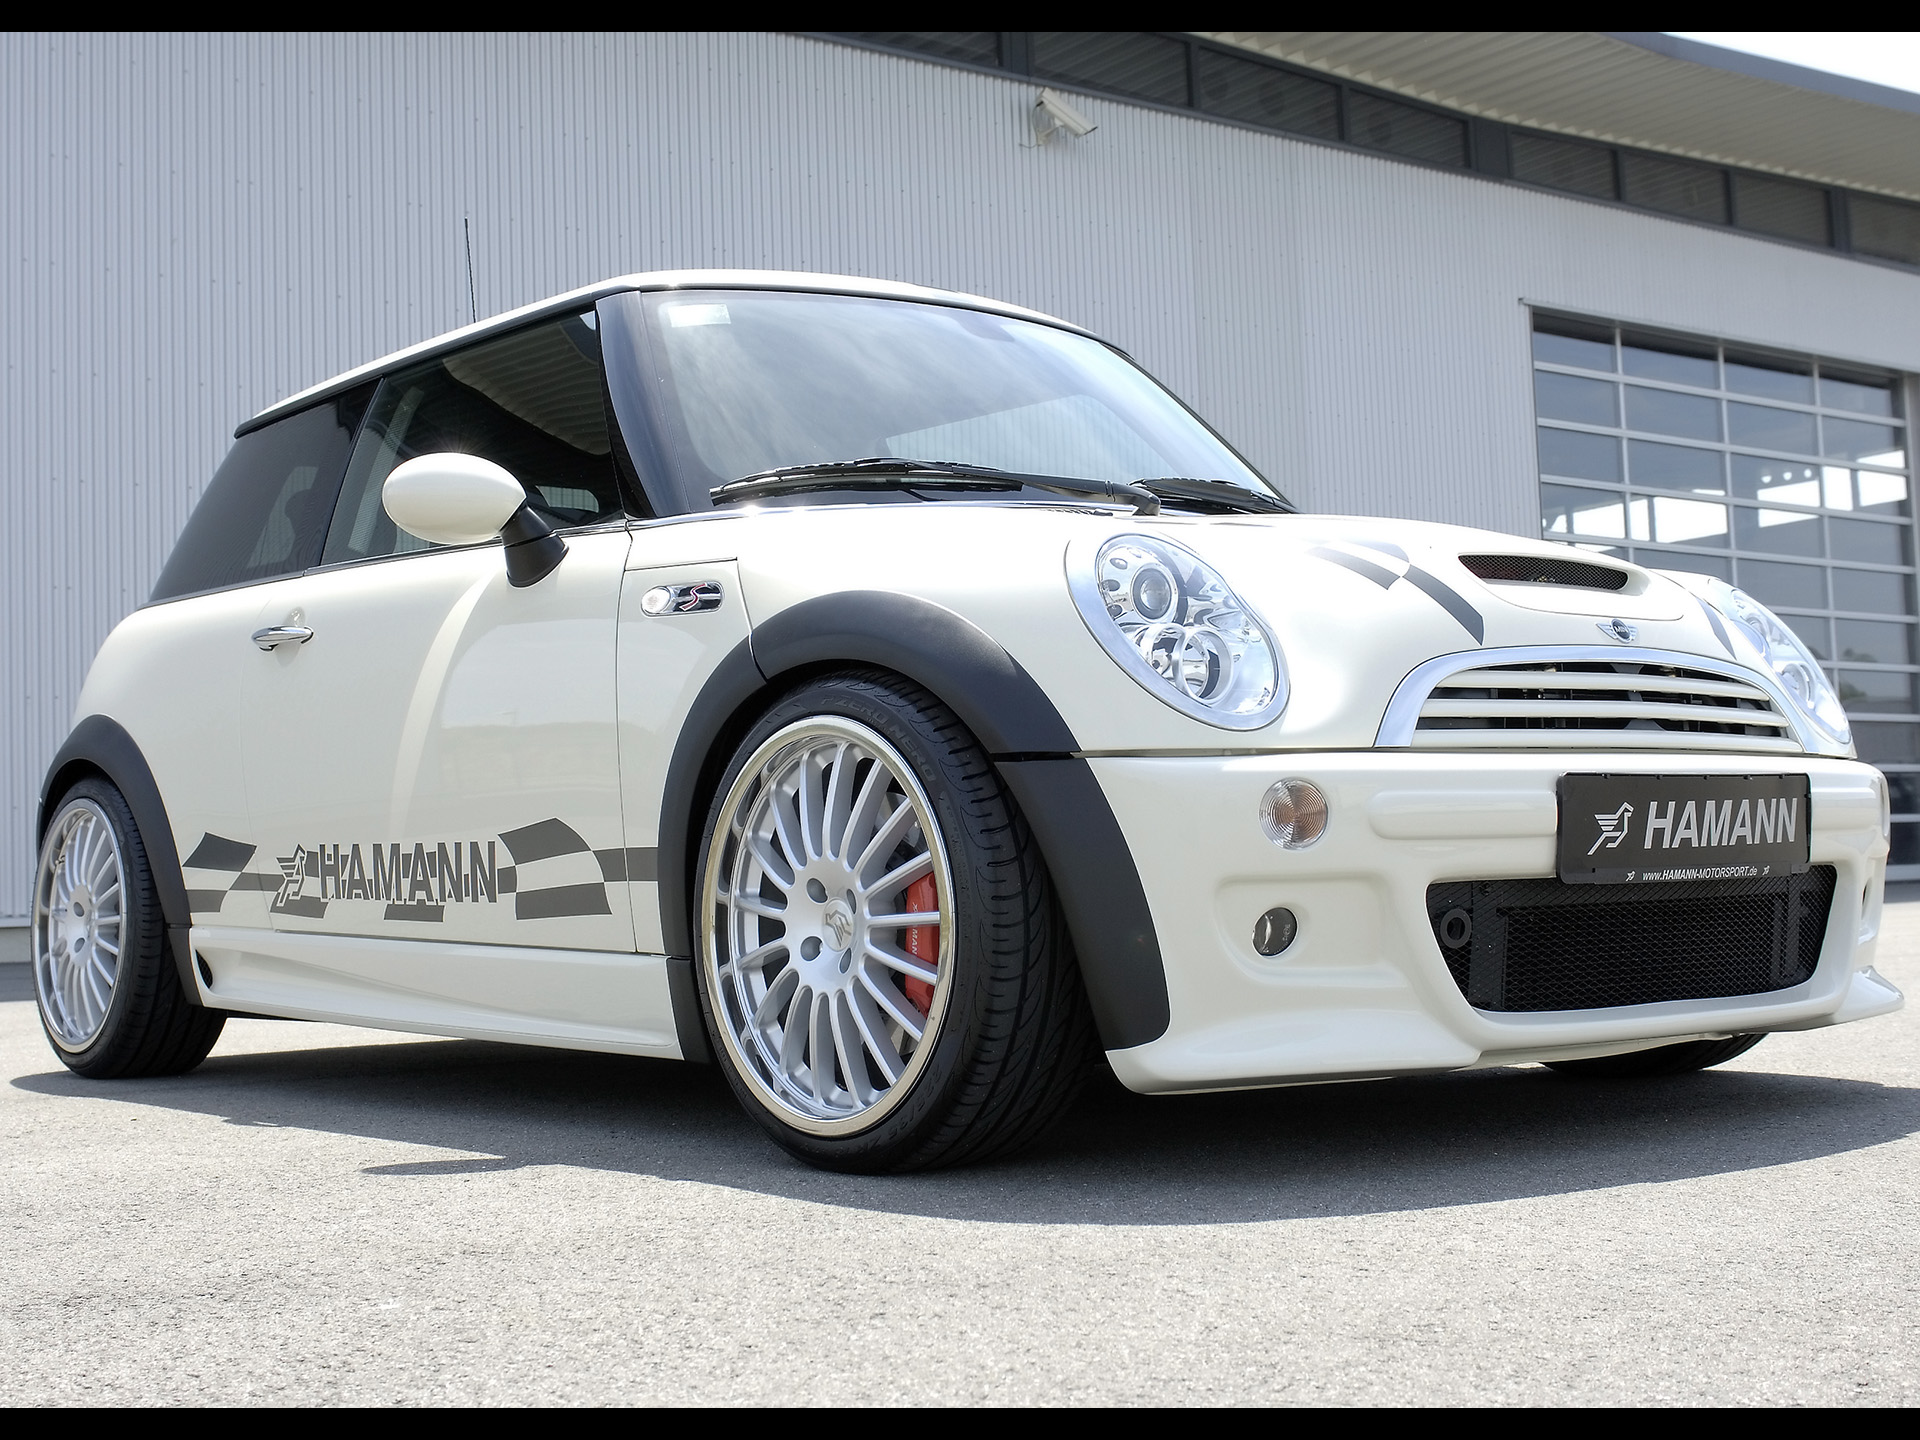 mini cooper s related images,301 to 350 - Zuoda Images